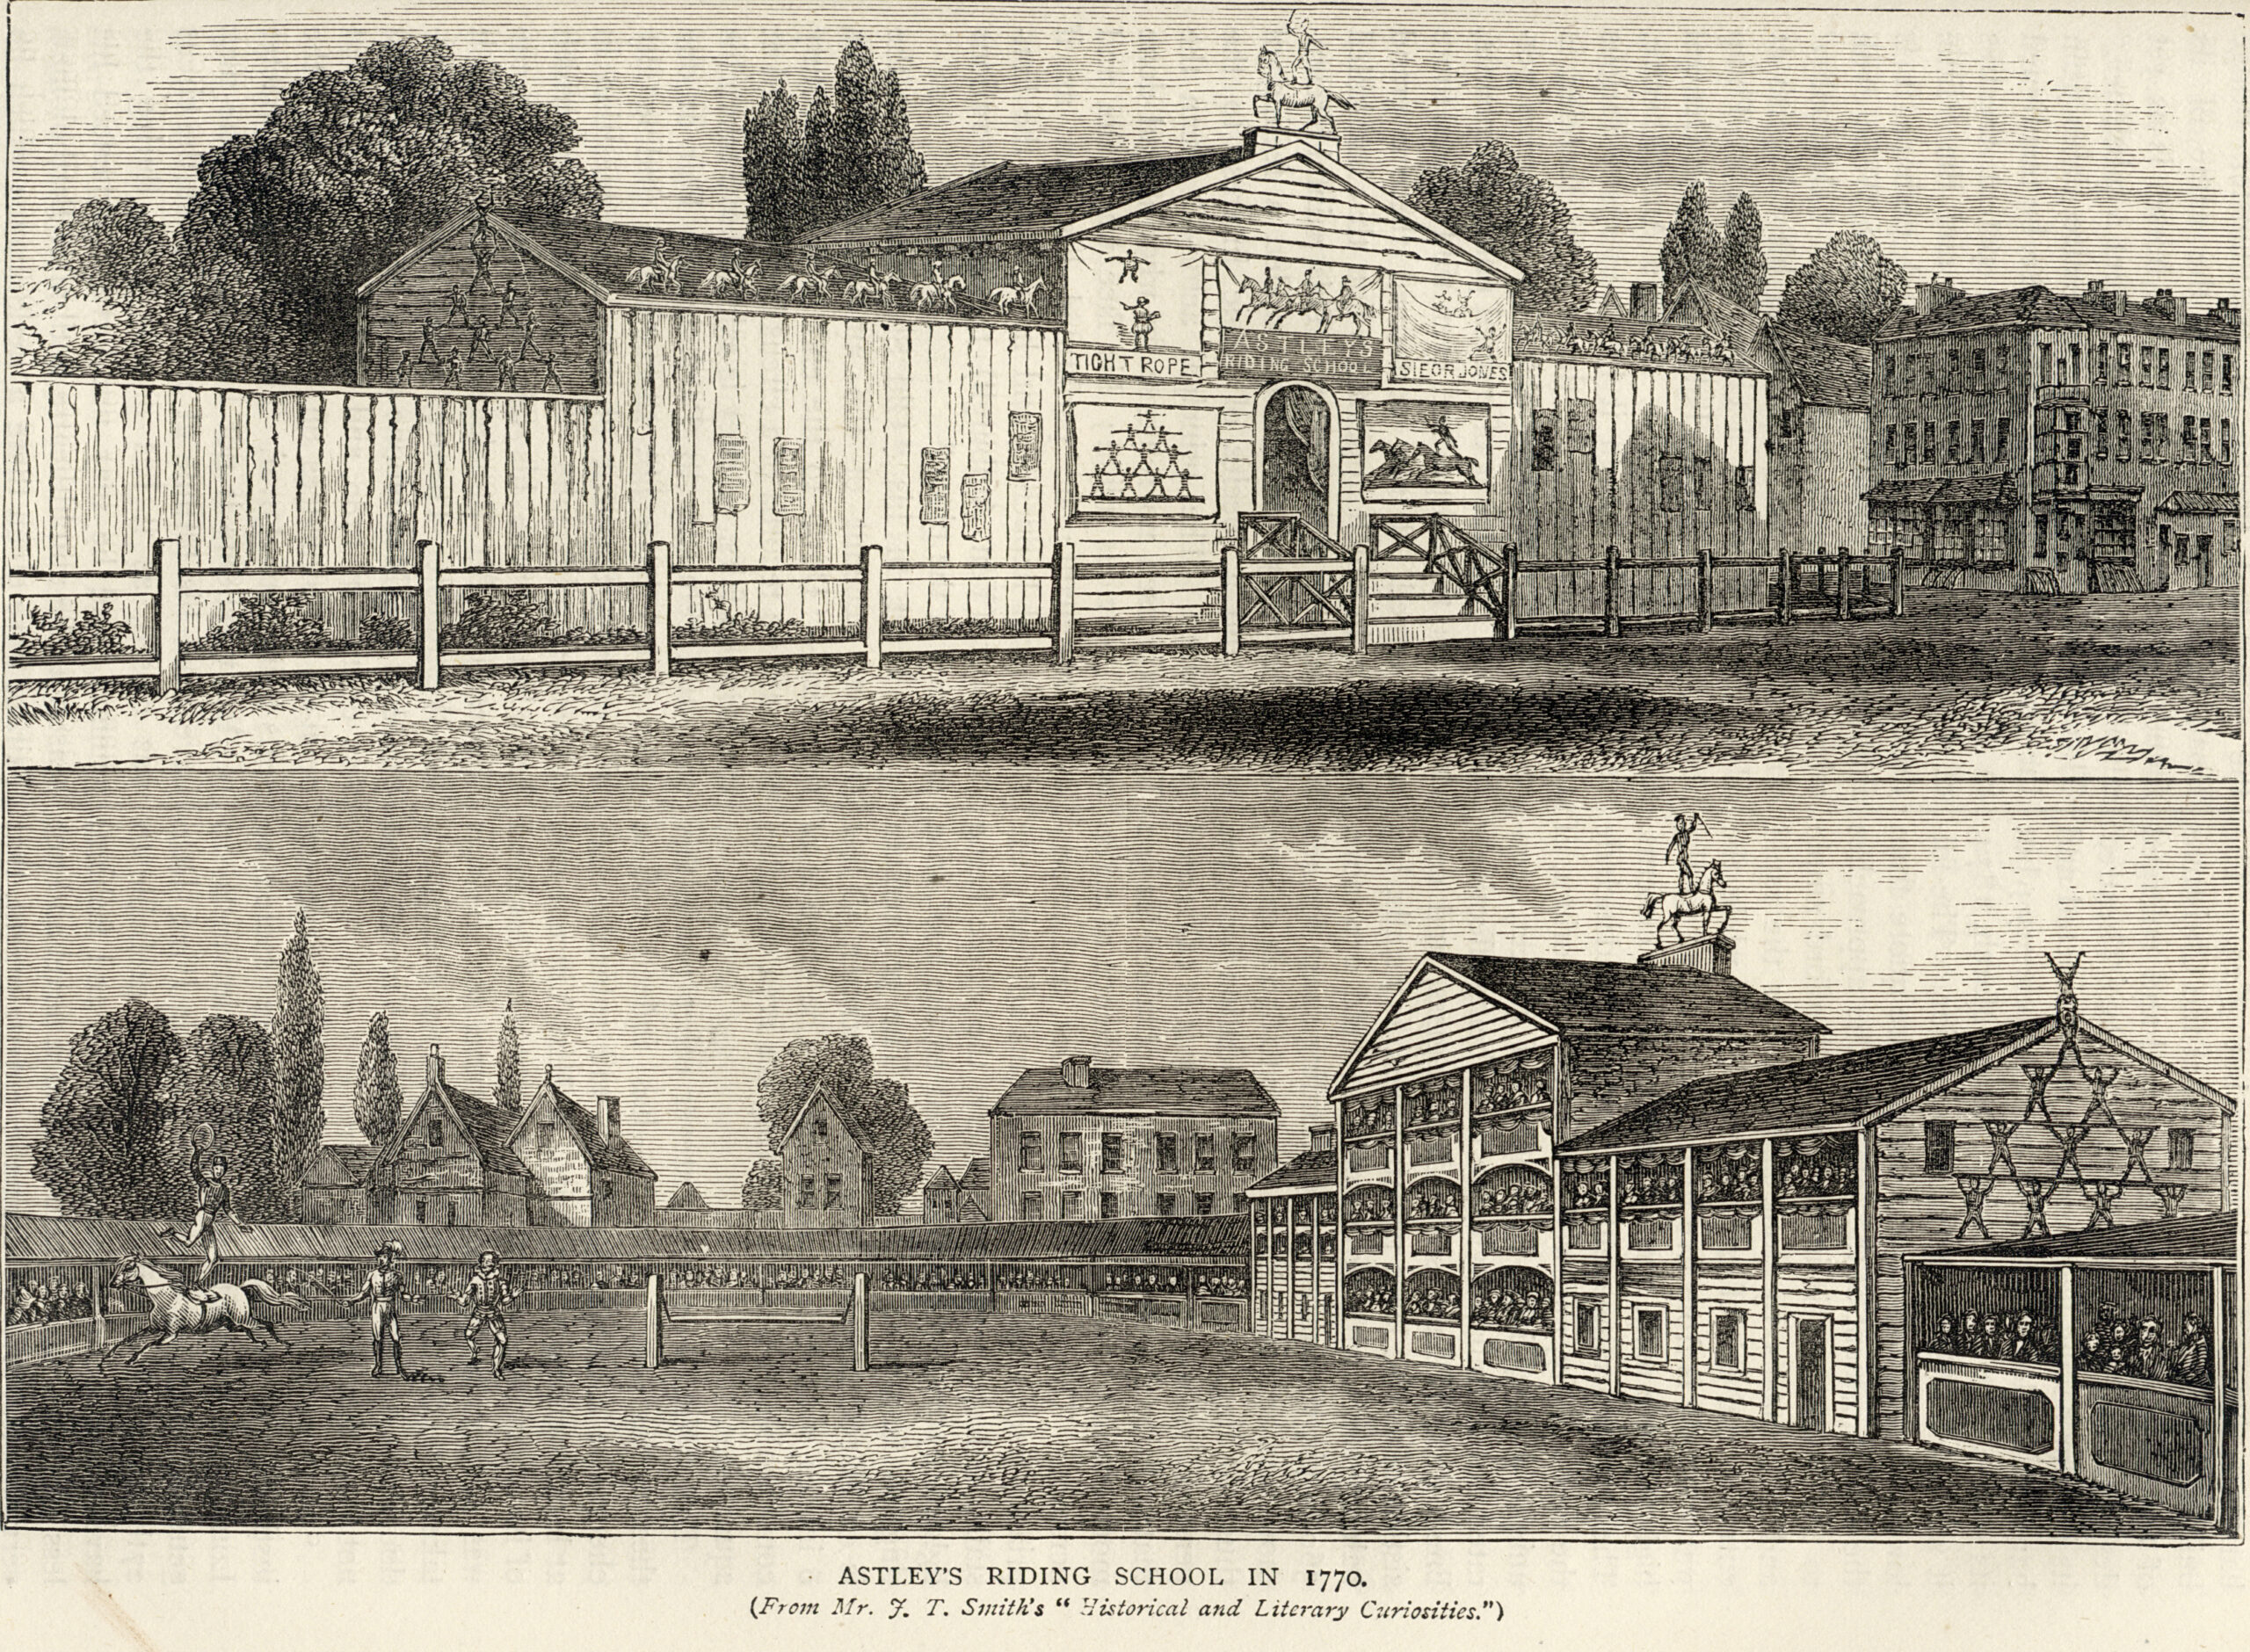 Black and white print showing two views of Astley's circus, an open arena in which a display of horse agility is taking place, with viewing stands. On the roof of the central is a statue of a horse with a man standing on it. Houses and trees either side of the site.